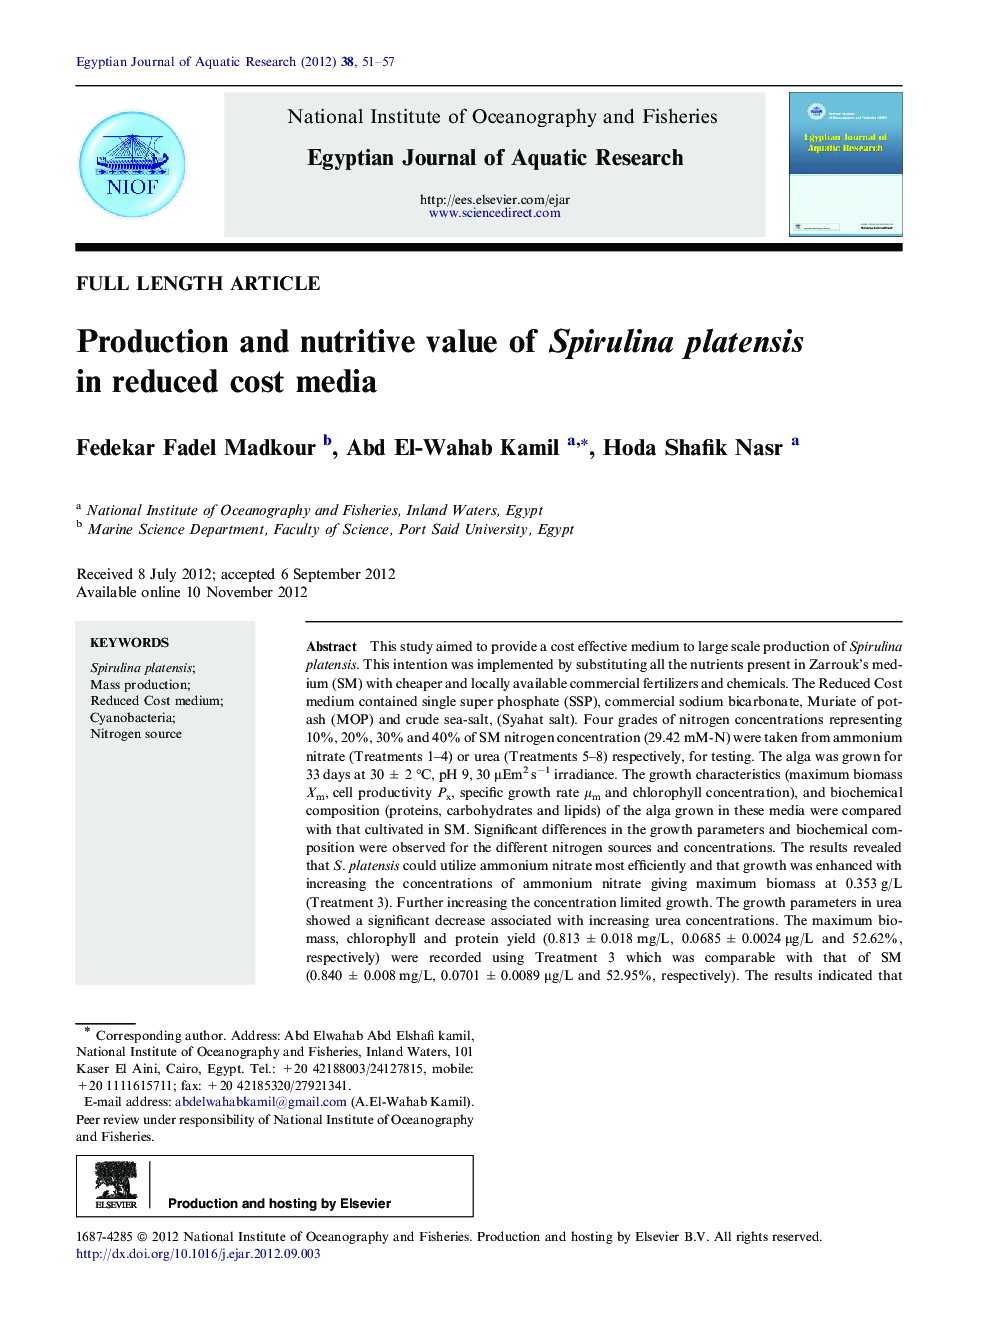 Production and nutritive value of Spirulina platensis in reduced cost media 